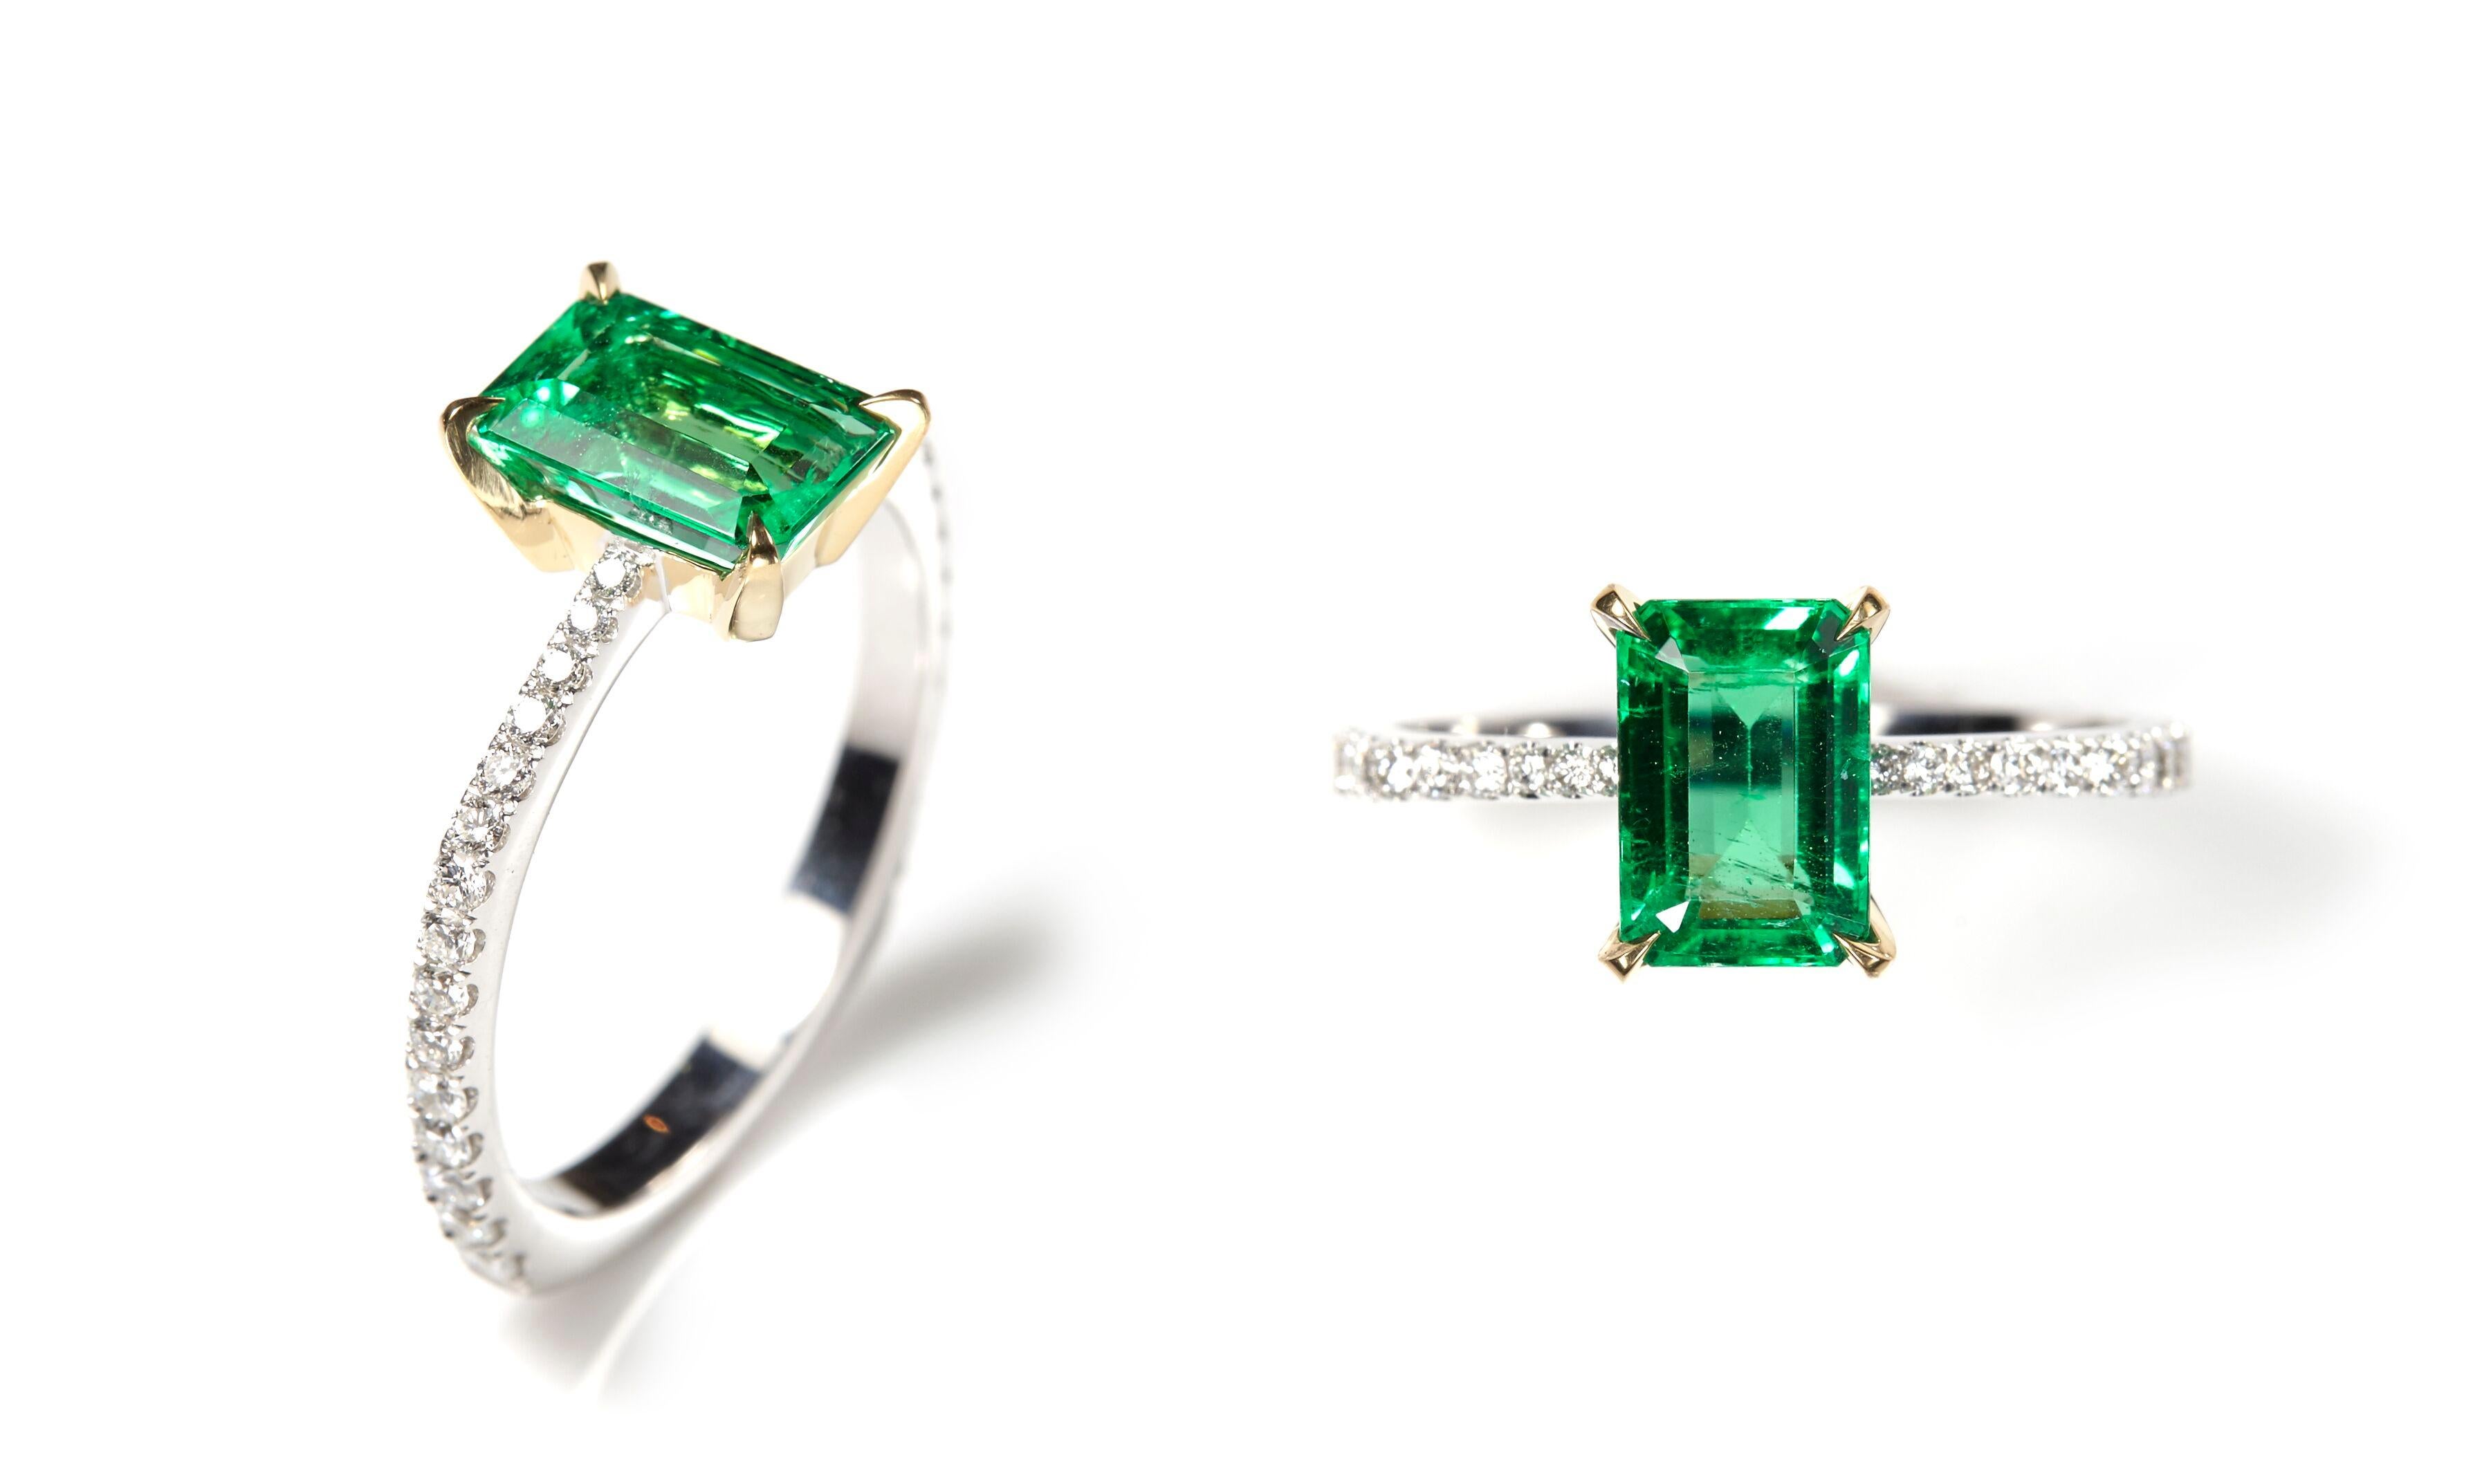 Designed exclusively by Ara Vartanian, this 18k White Gold Ring features one Emerald, in a Emerald faceted cut, weighing 1,34ct (one carat and thirty-four points), along with thirty White Diamonds in a round brilliant cut, with a total weight of